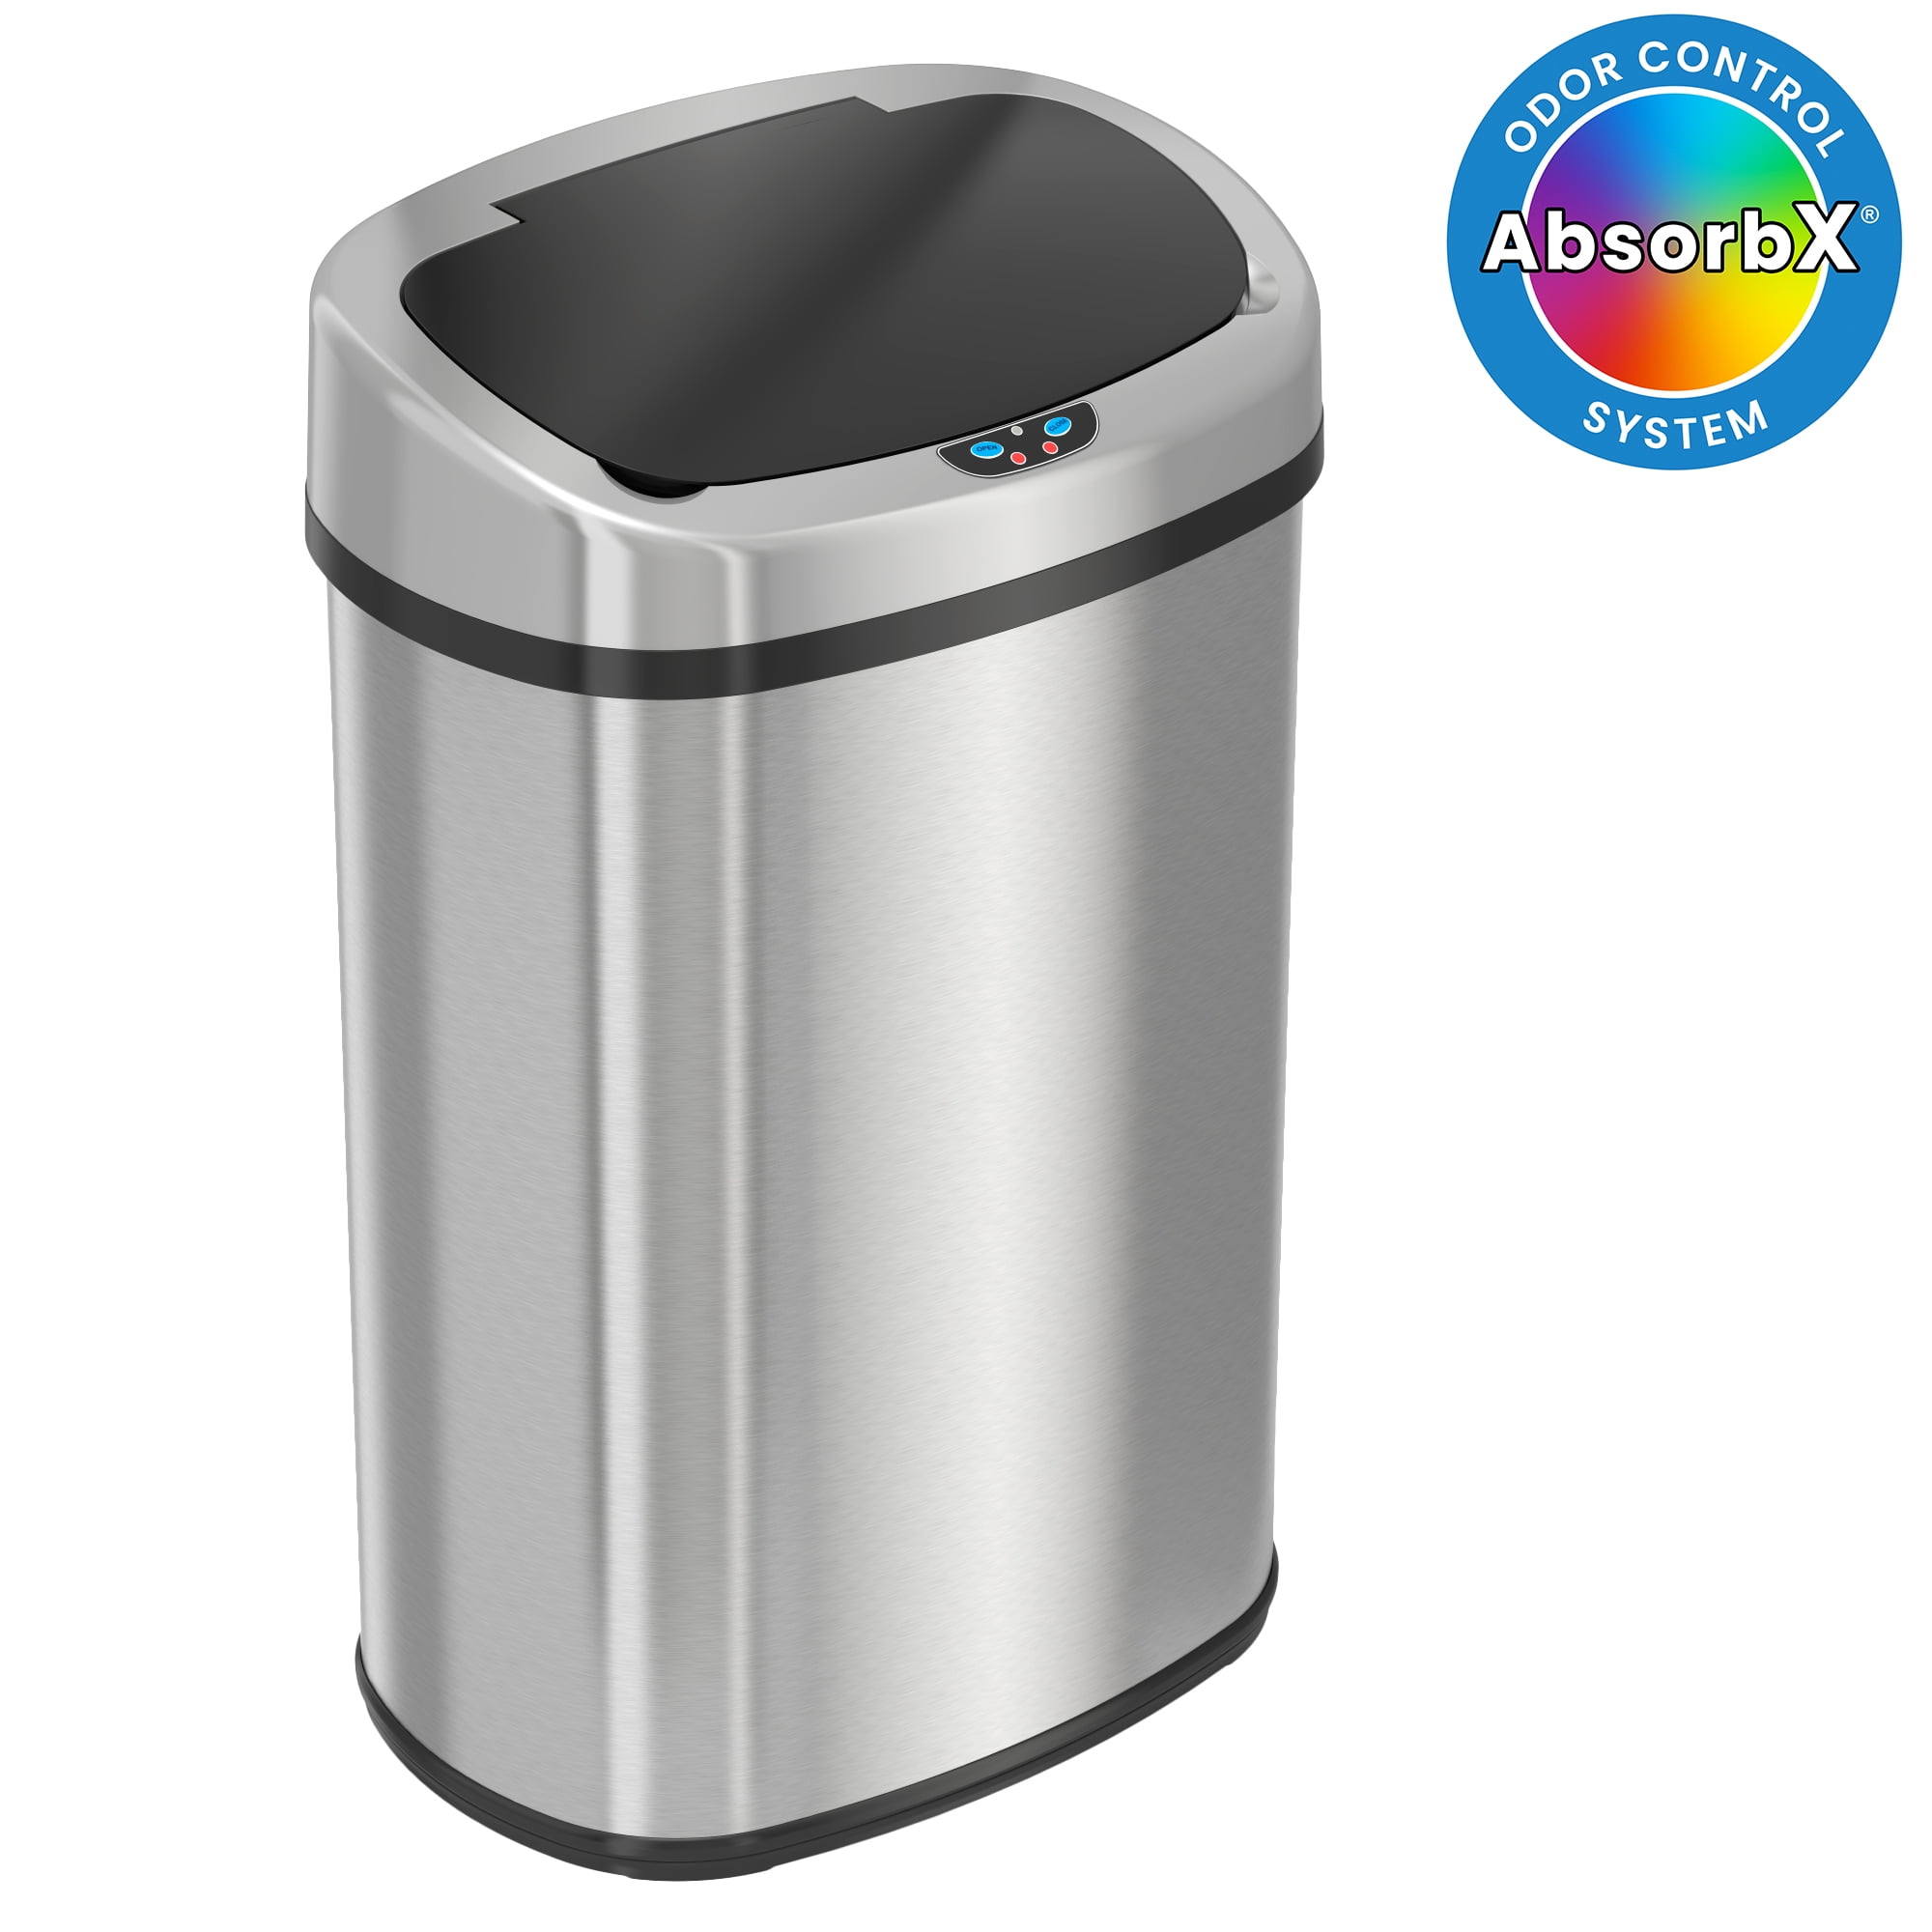 Best Buy: iTouchless 13-Gal. Touchless Trash Can Stainless Steel IT13MX